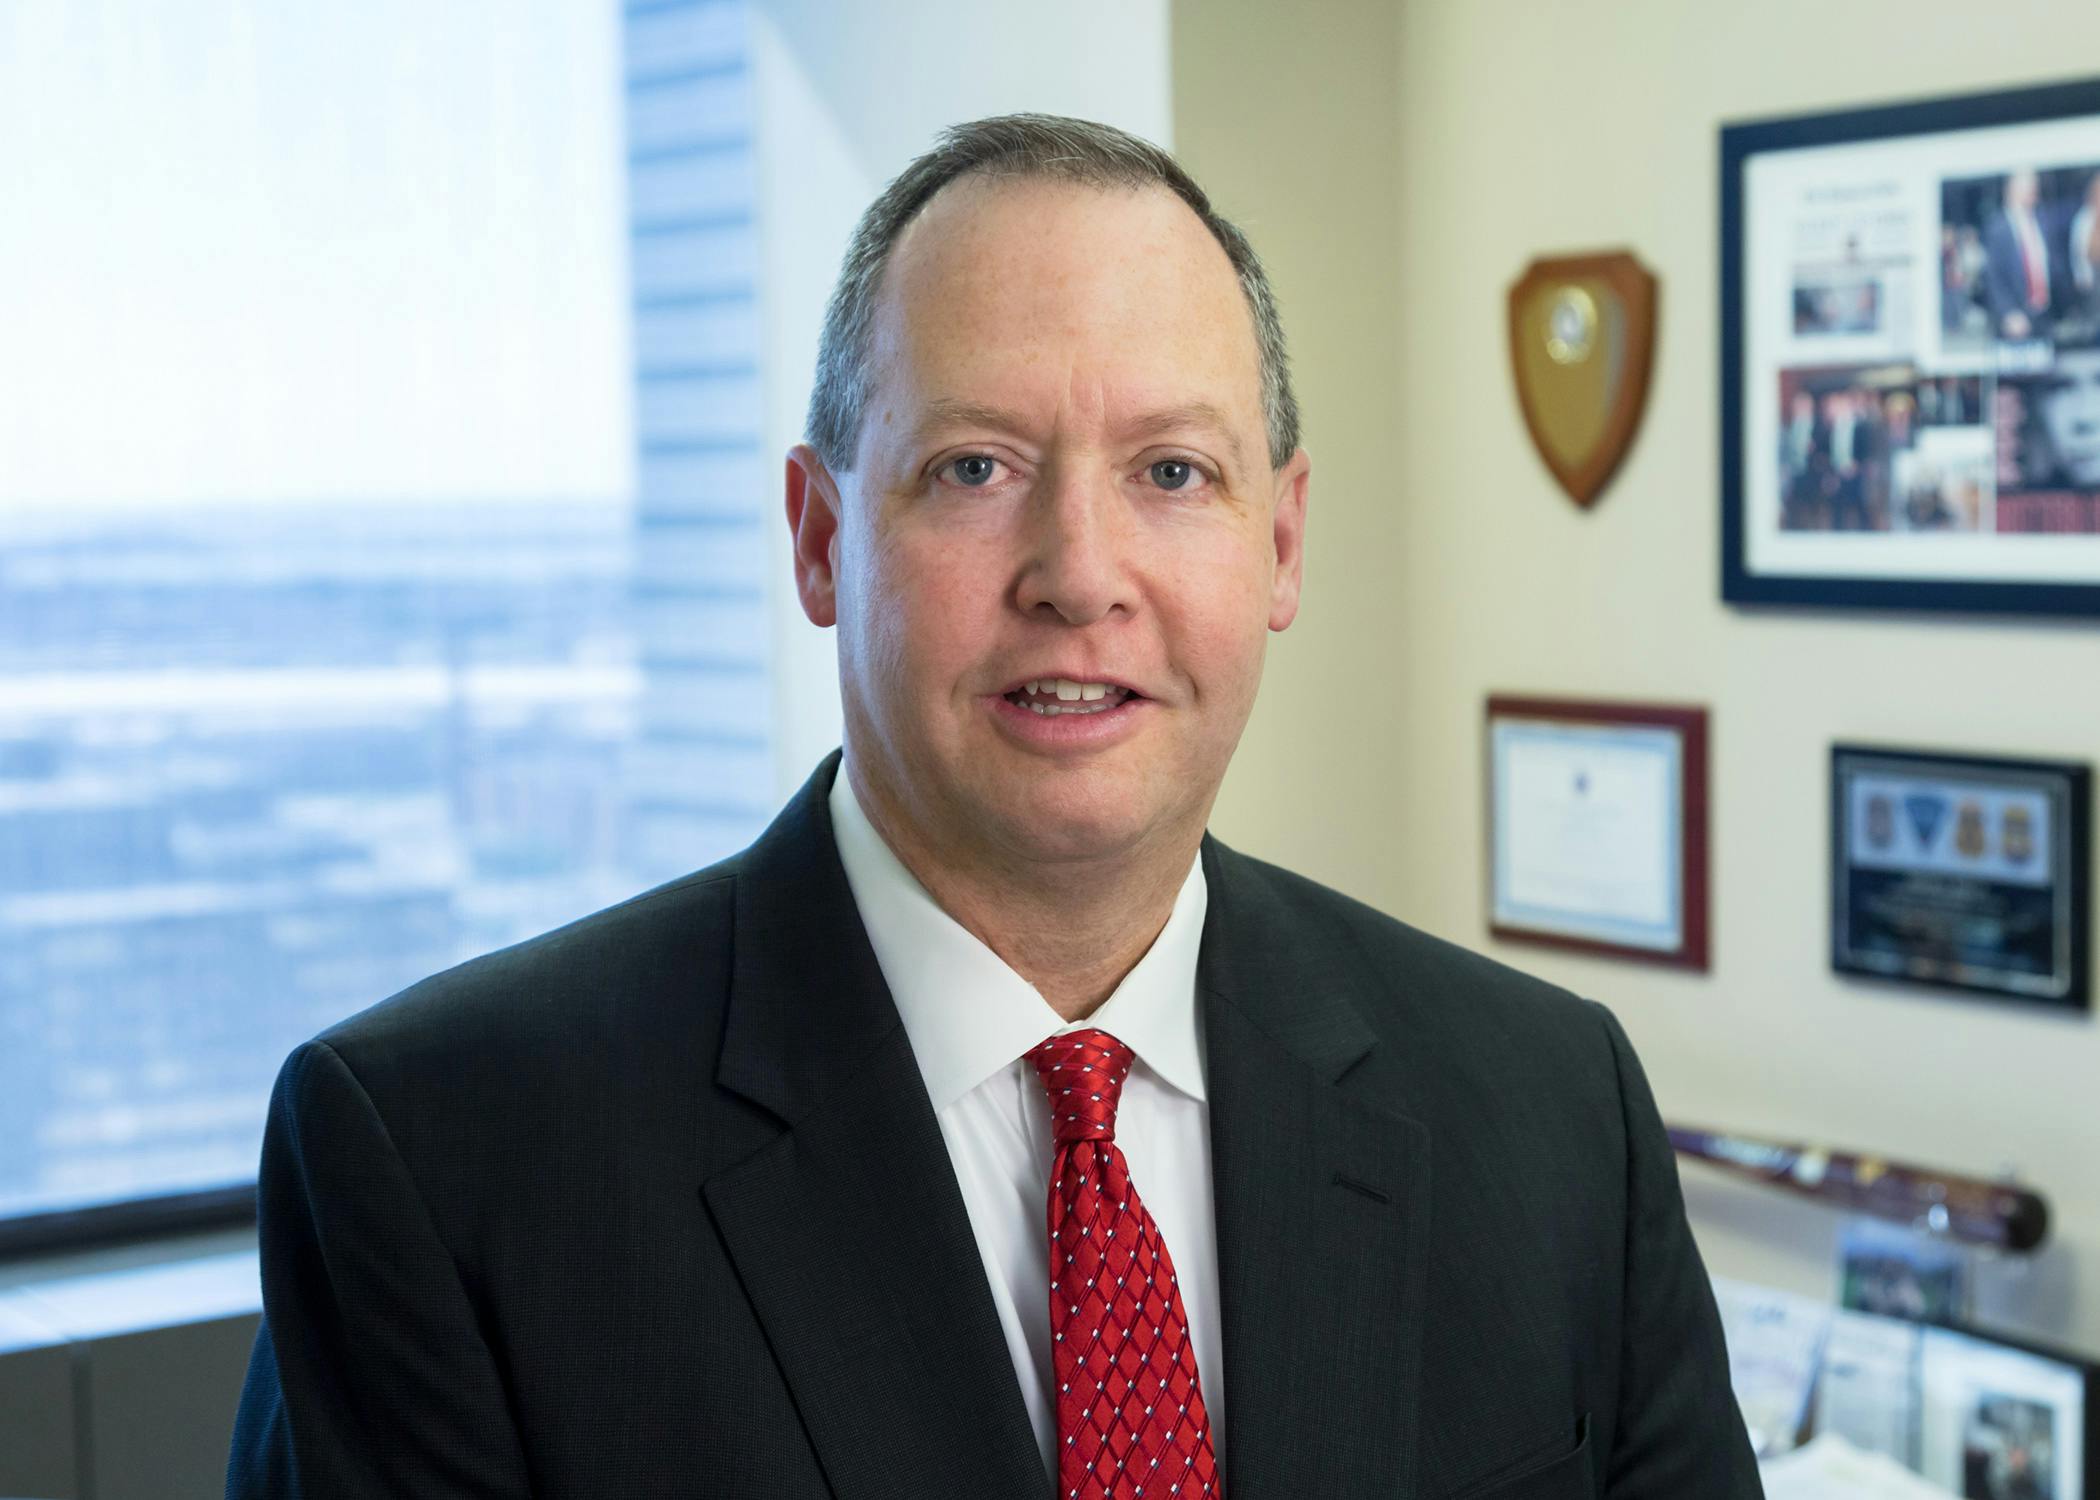 Brian T. Kelly - Government Investigations & White Collar Defense Lawyer - Nixon Peabody LLP